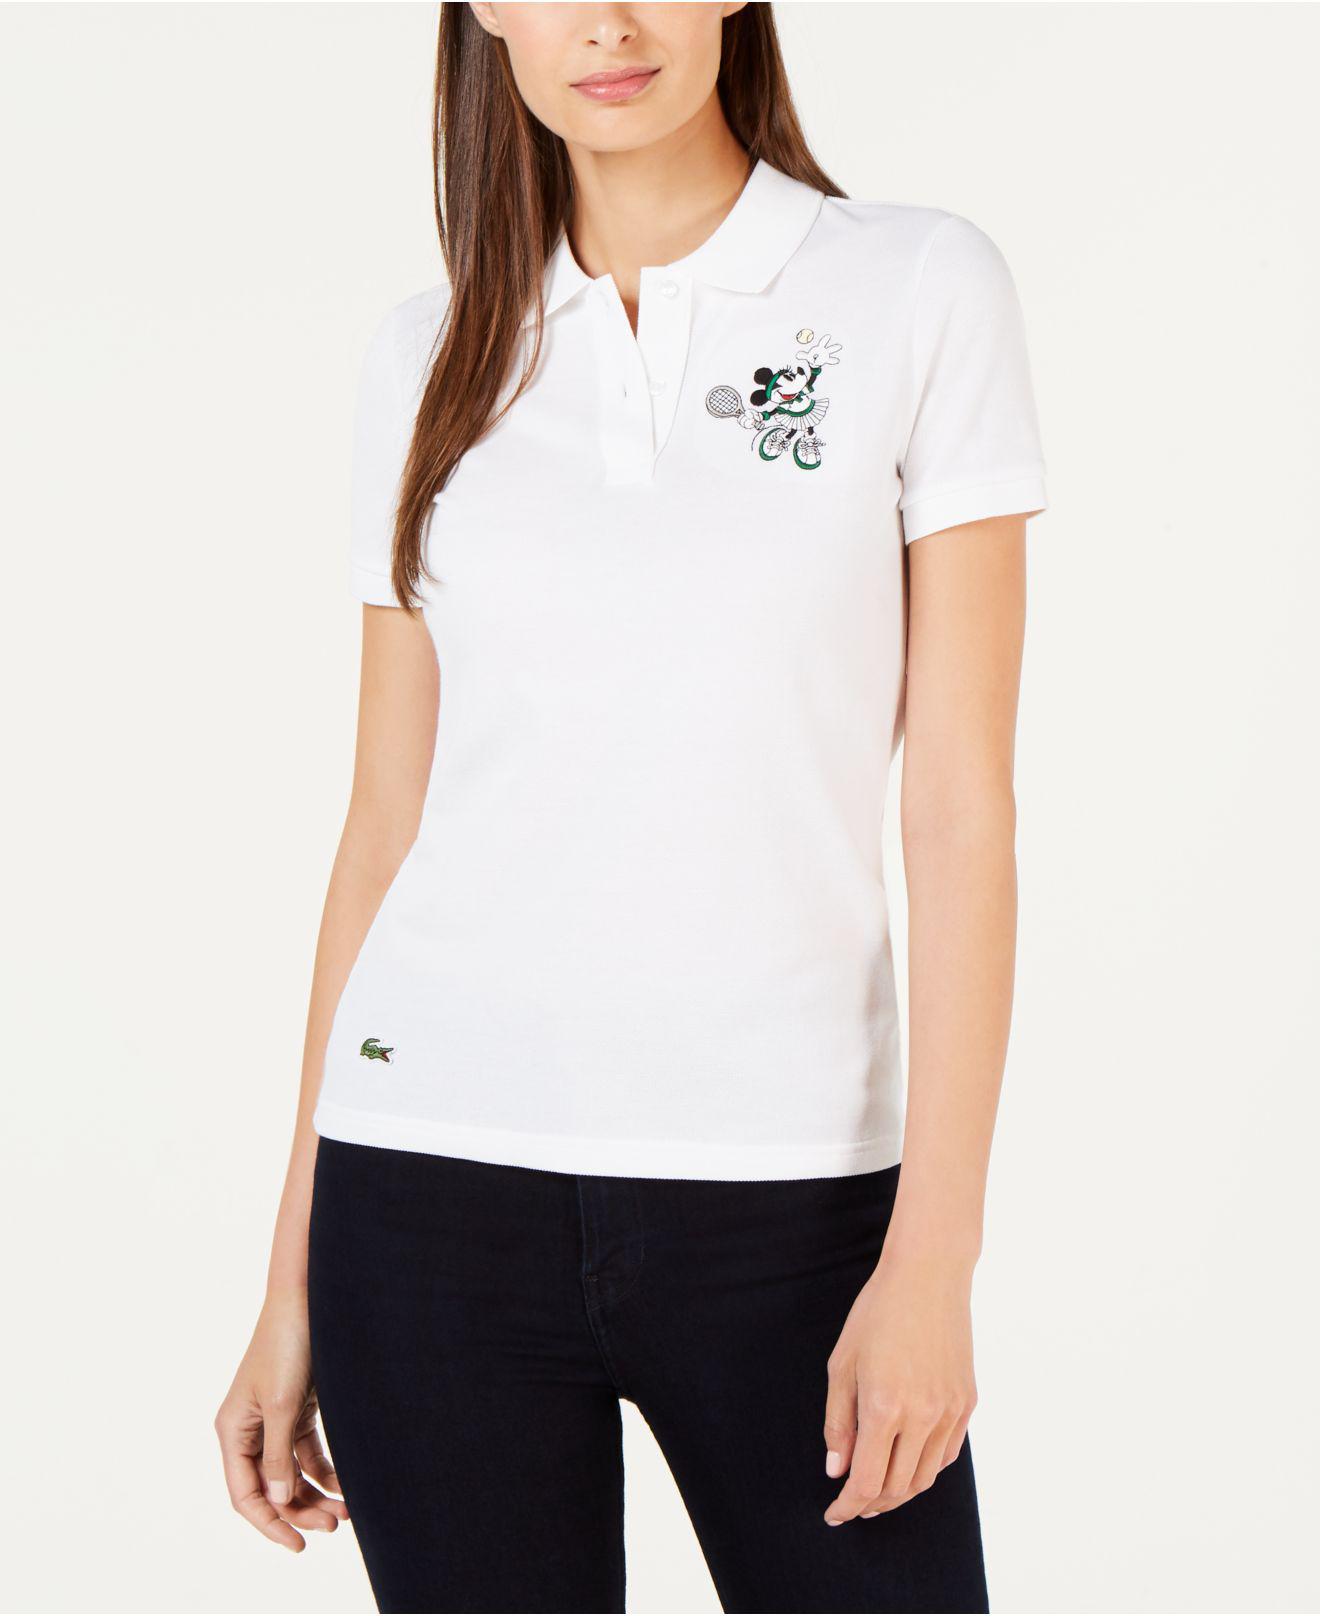 minnie mouse lacoste